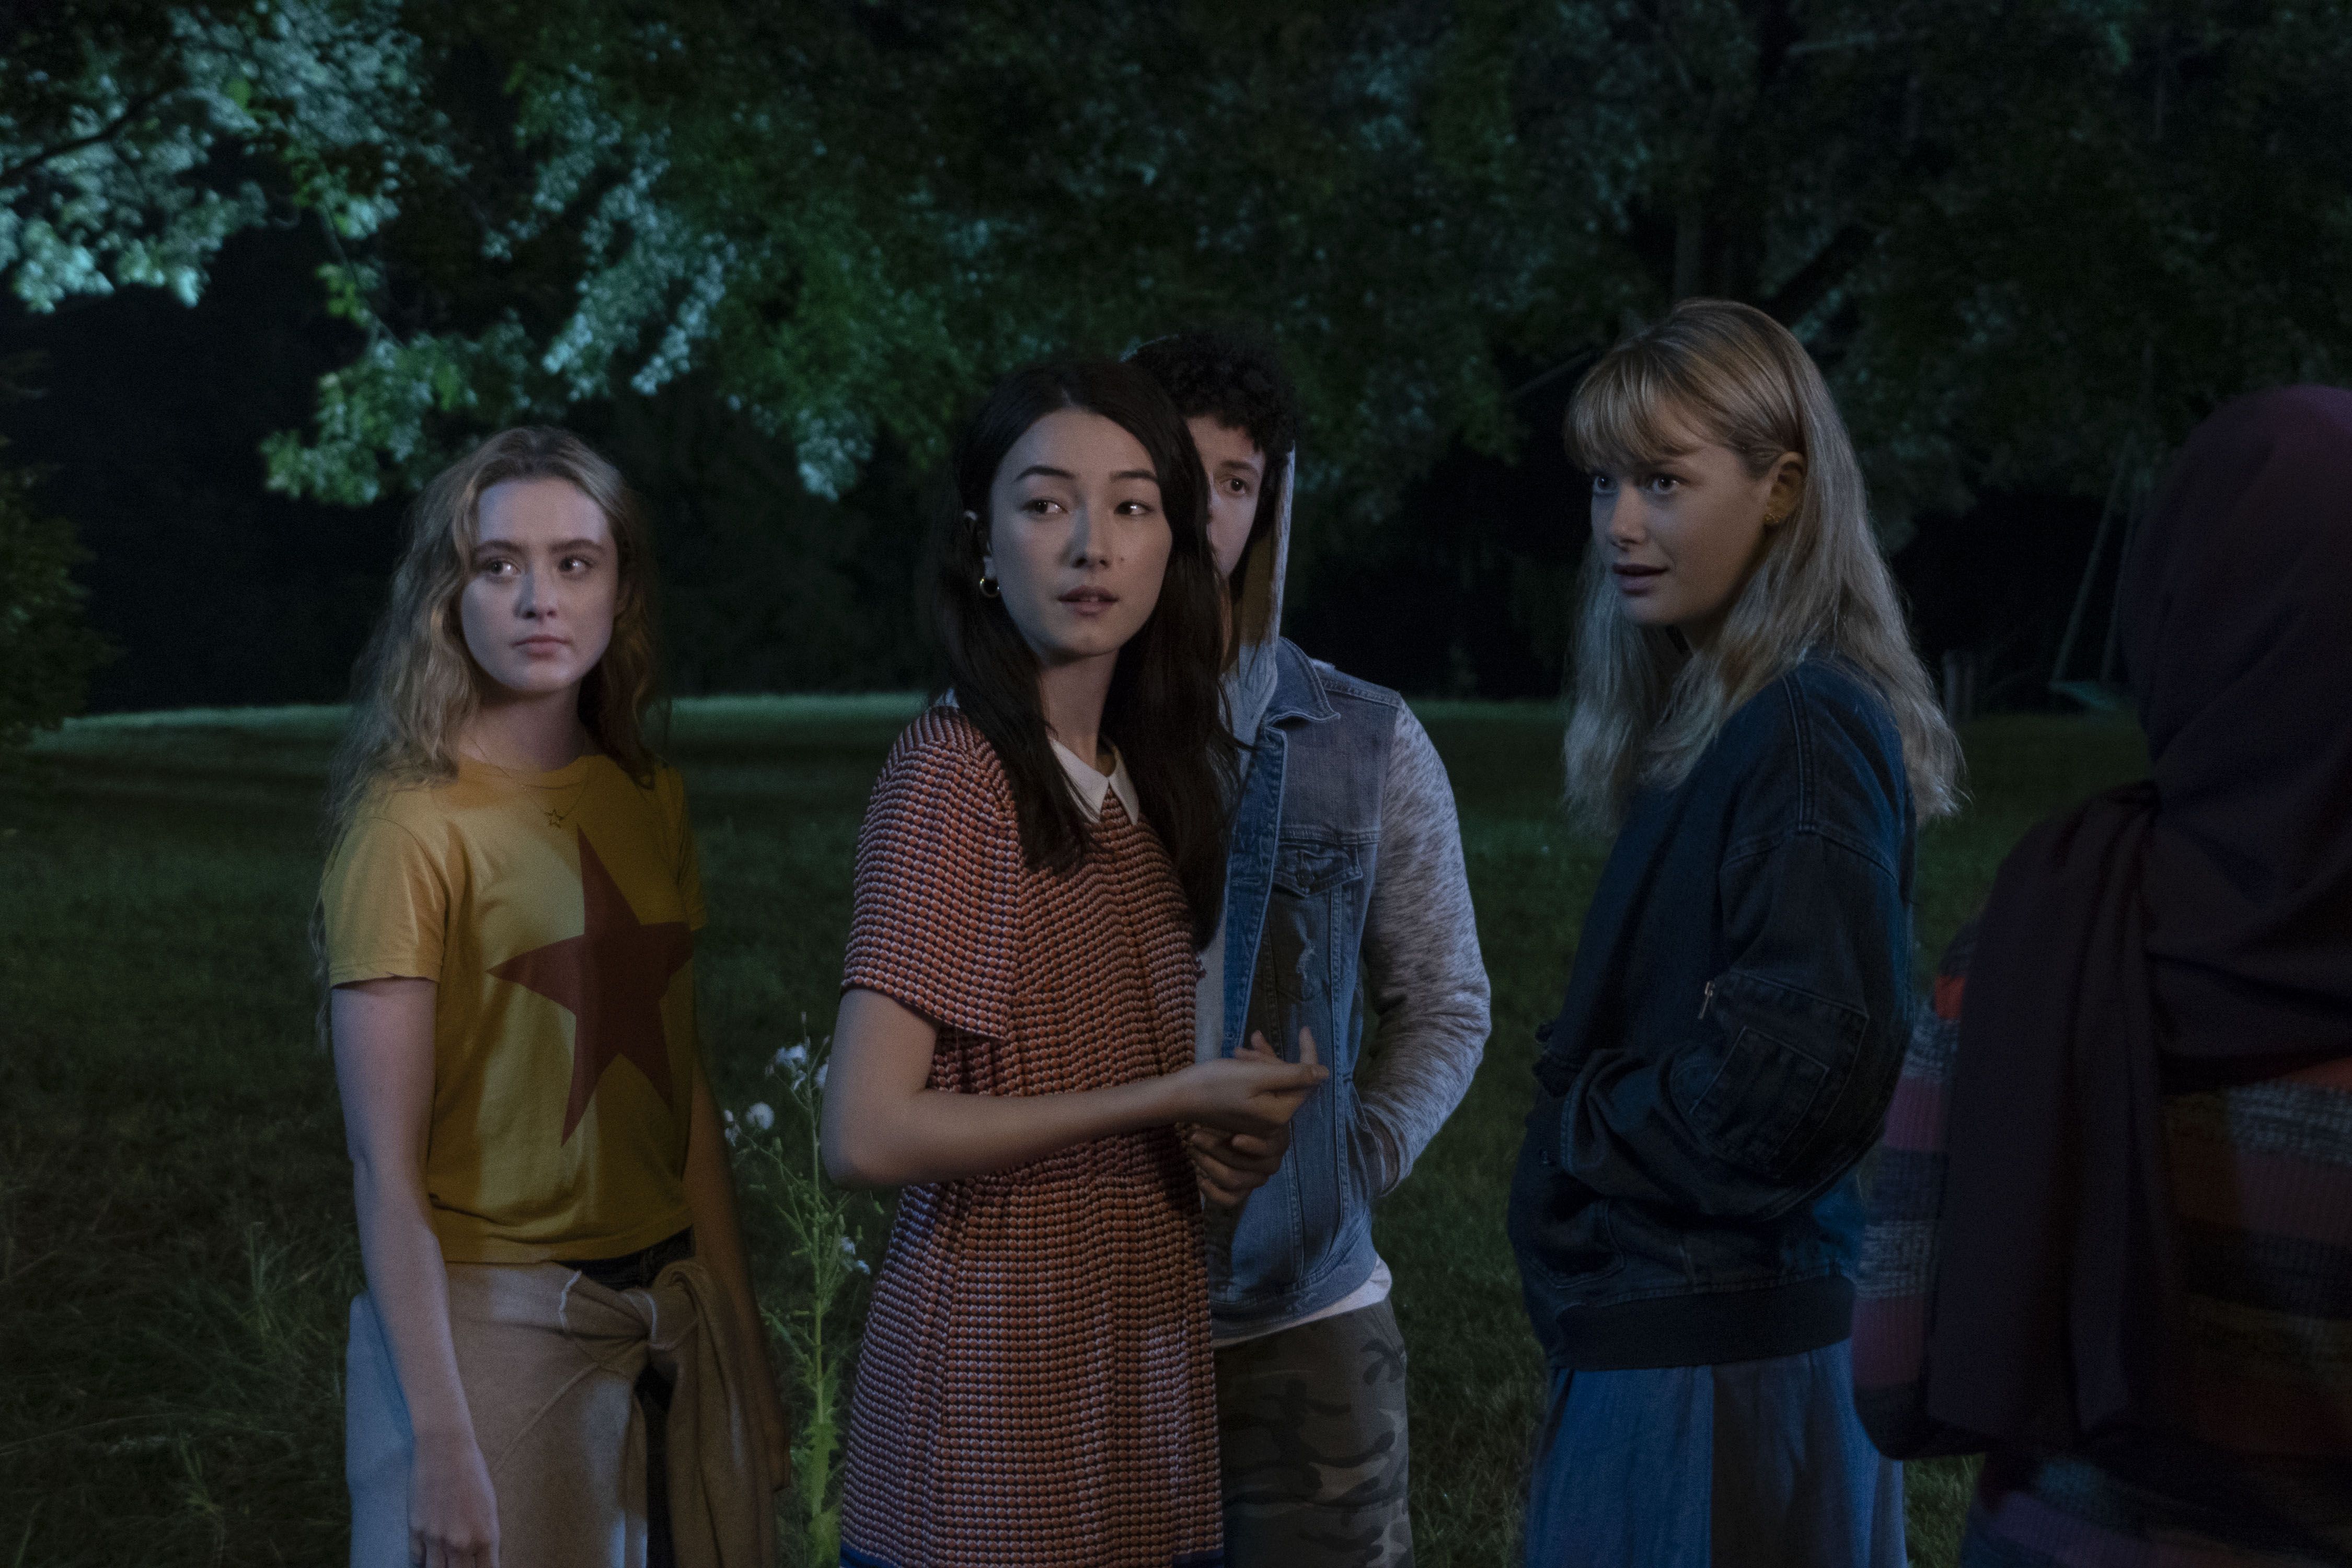 Netflix's The Society actors are way older than the teenagers they